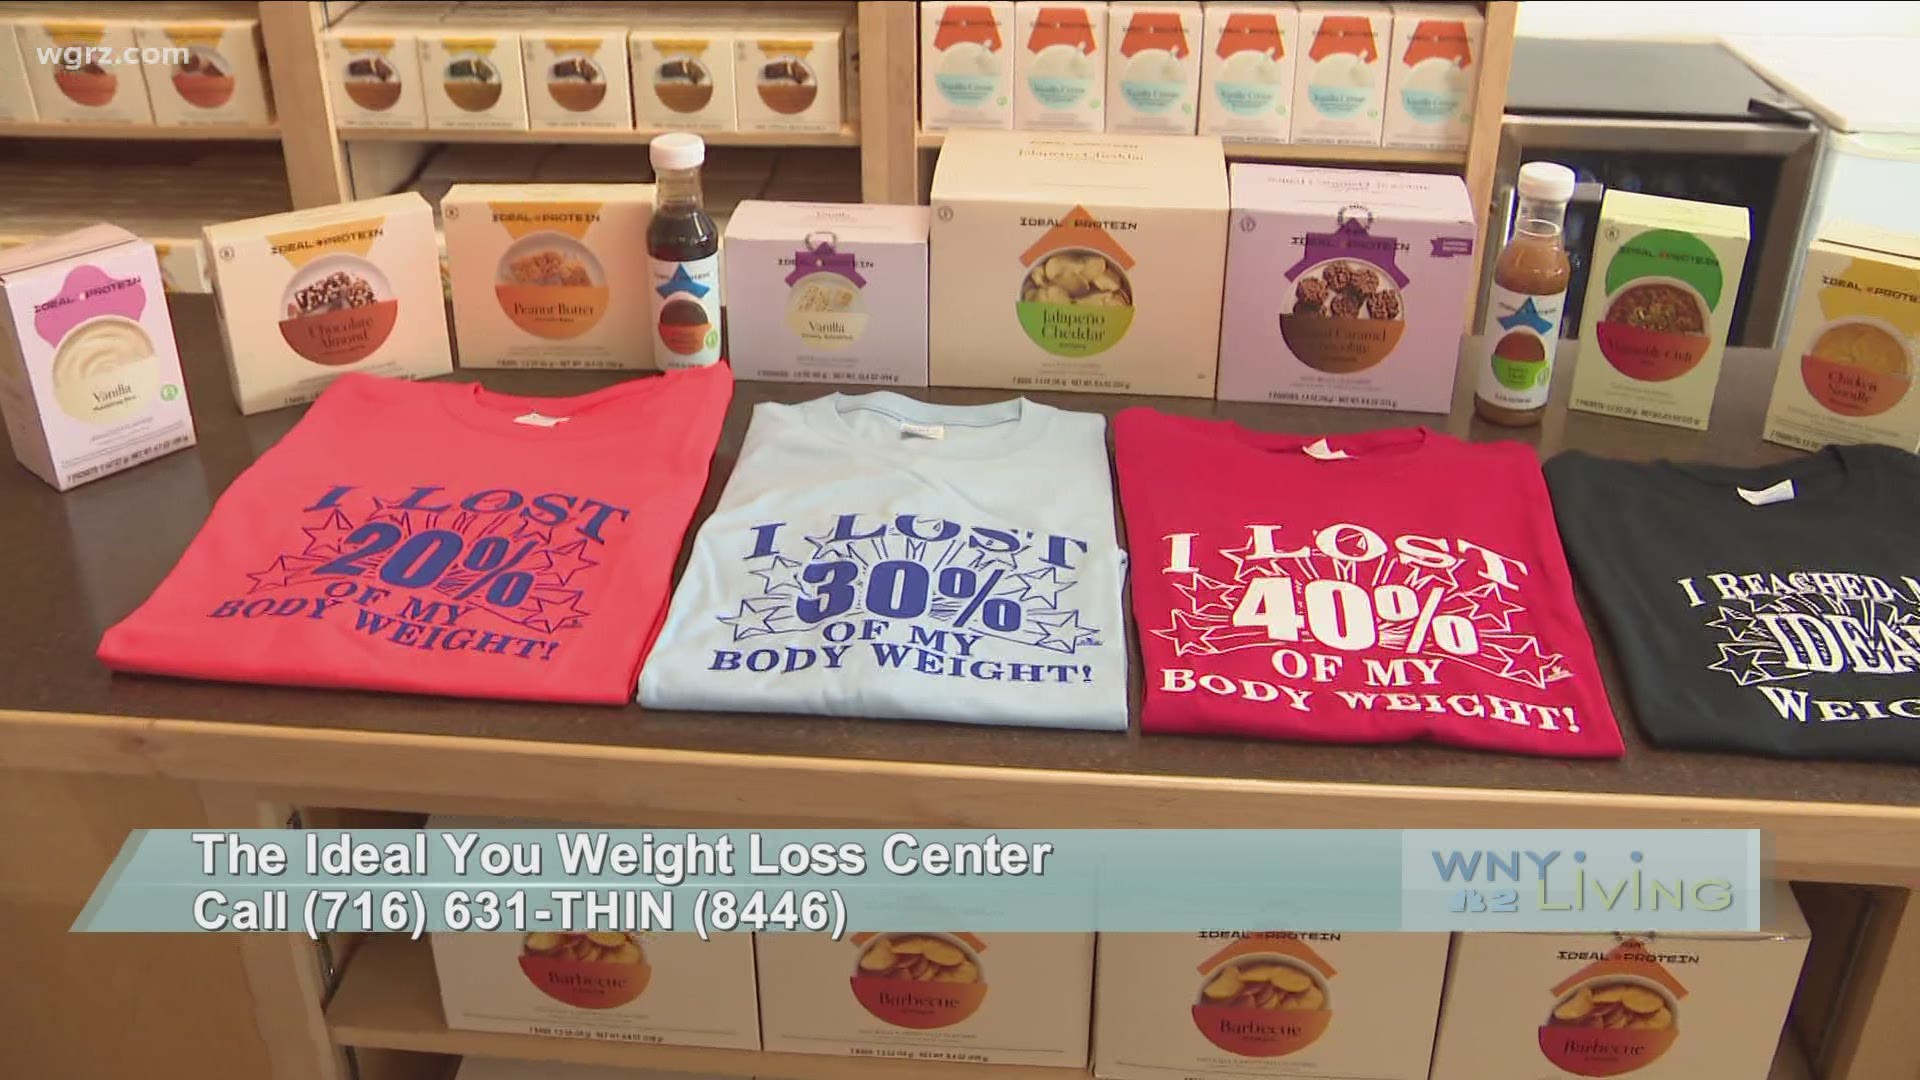 WNY Living - October 17 - The Ideal You Weight Loss Center (THIS VIDEO IS SPONSORED BY THE IDEAL YOU WEIGHT LOSS CENTER)